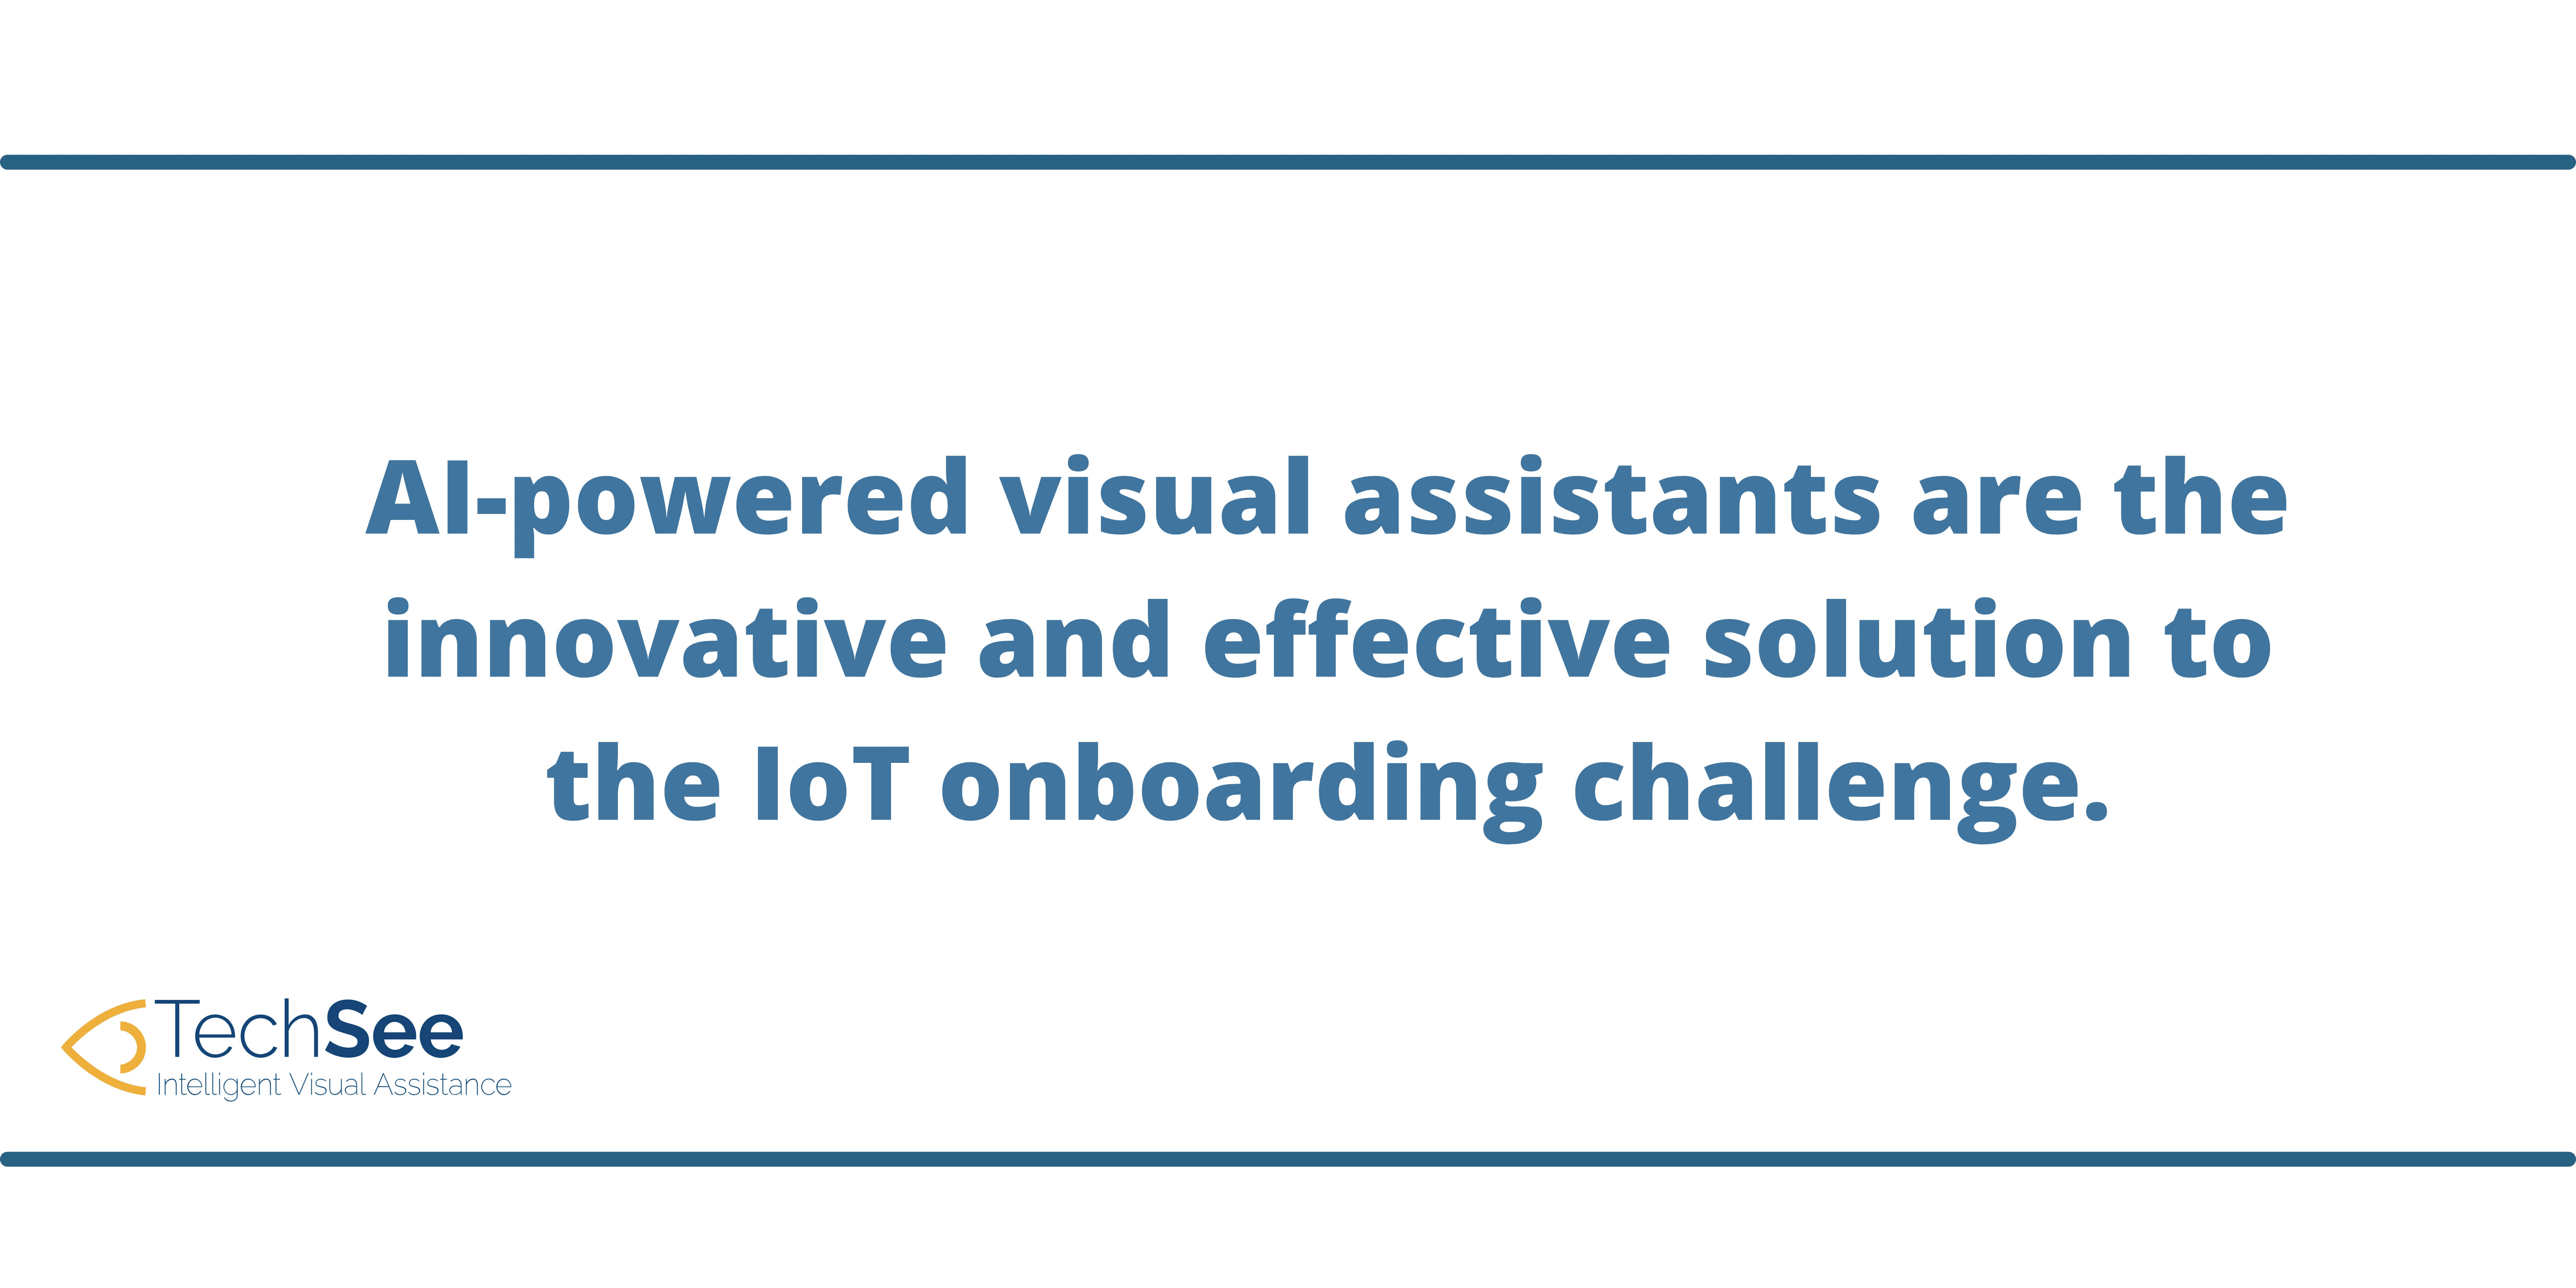 TechSee discusses how AI assistants are an effective solution to the IoT onboarding problem.